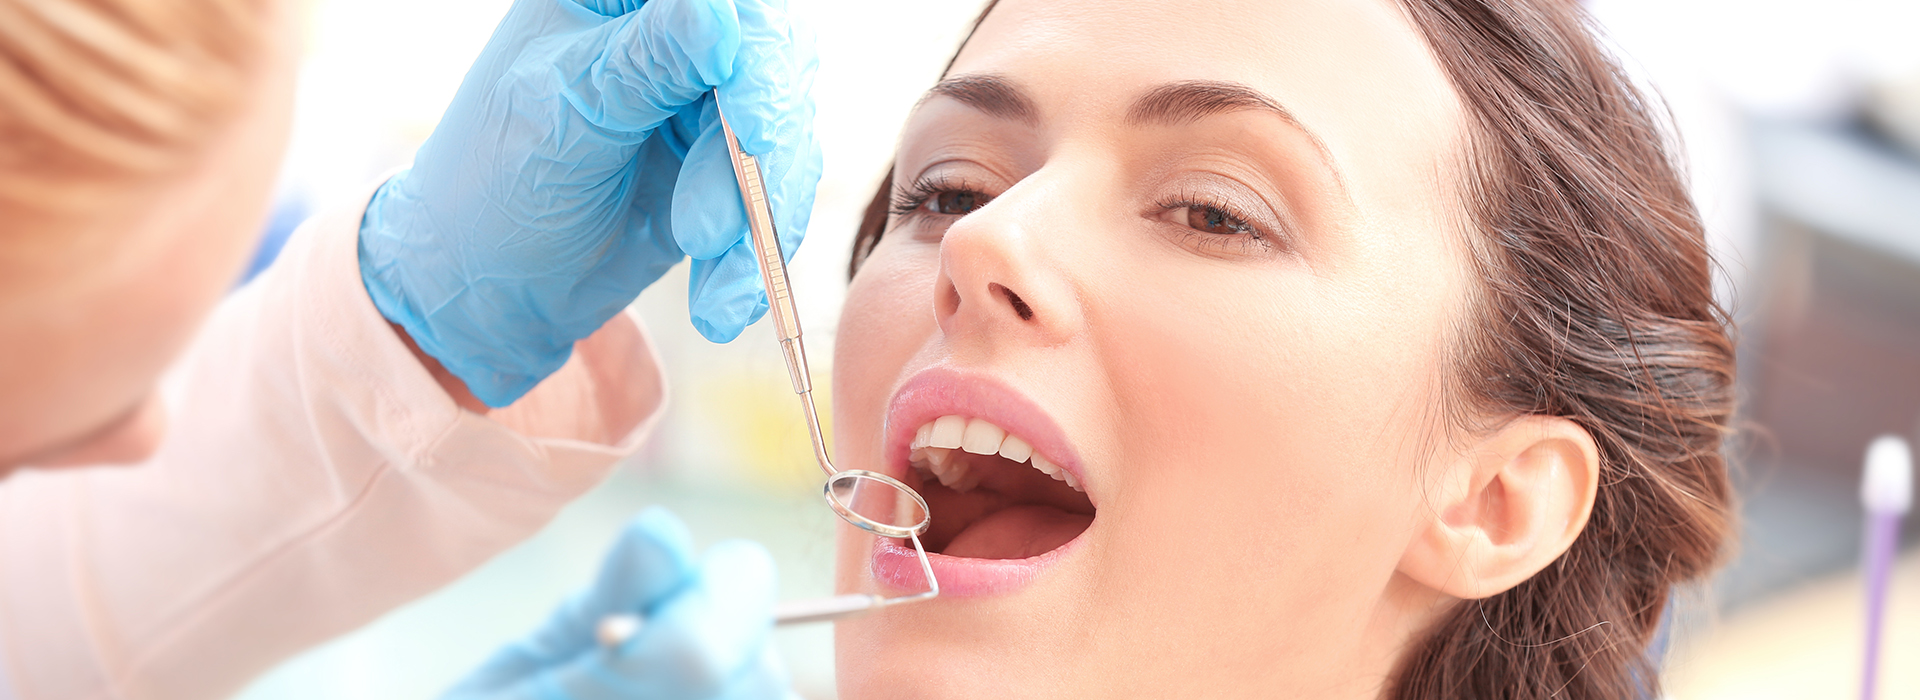 North Texas Dental Care | TMJ Disorders, Sedation Dentistry and Periodontal Treatment